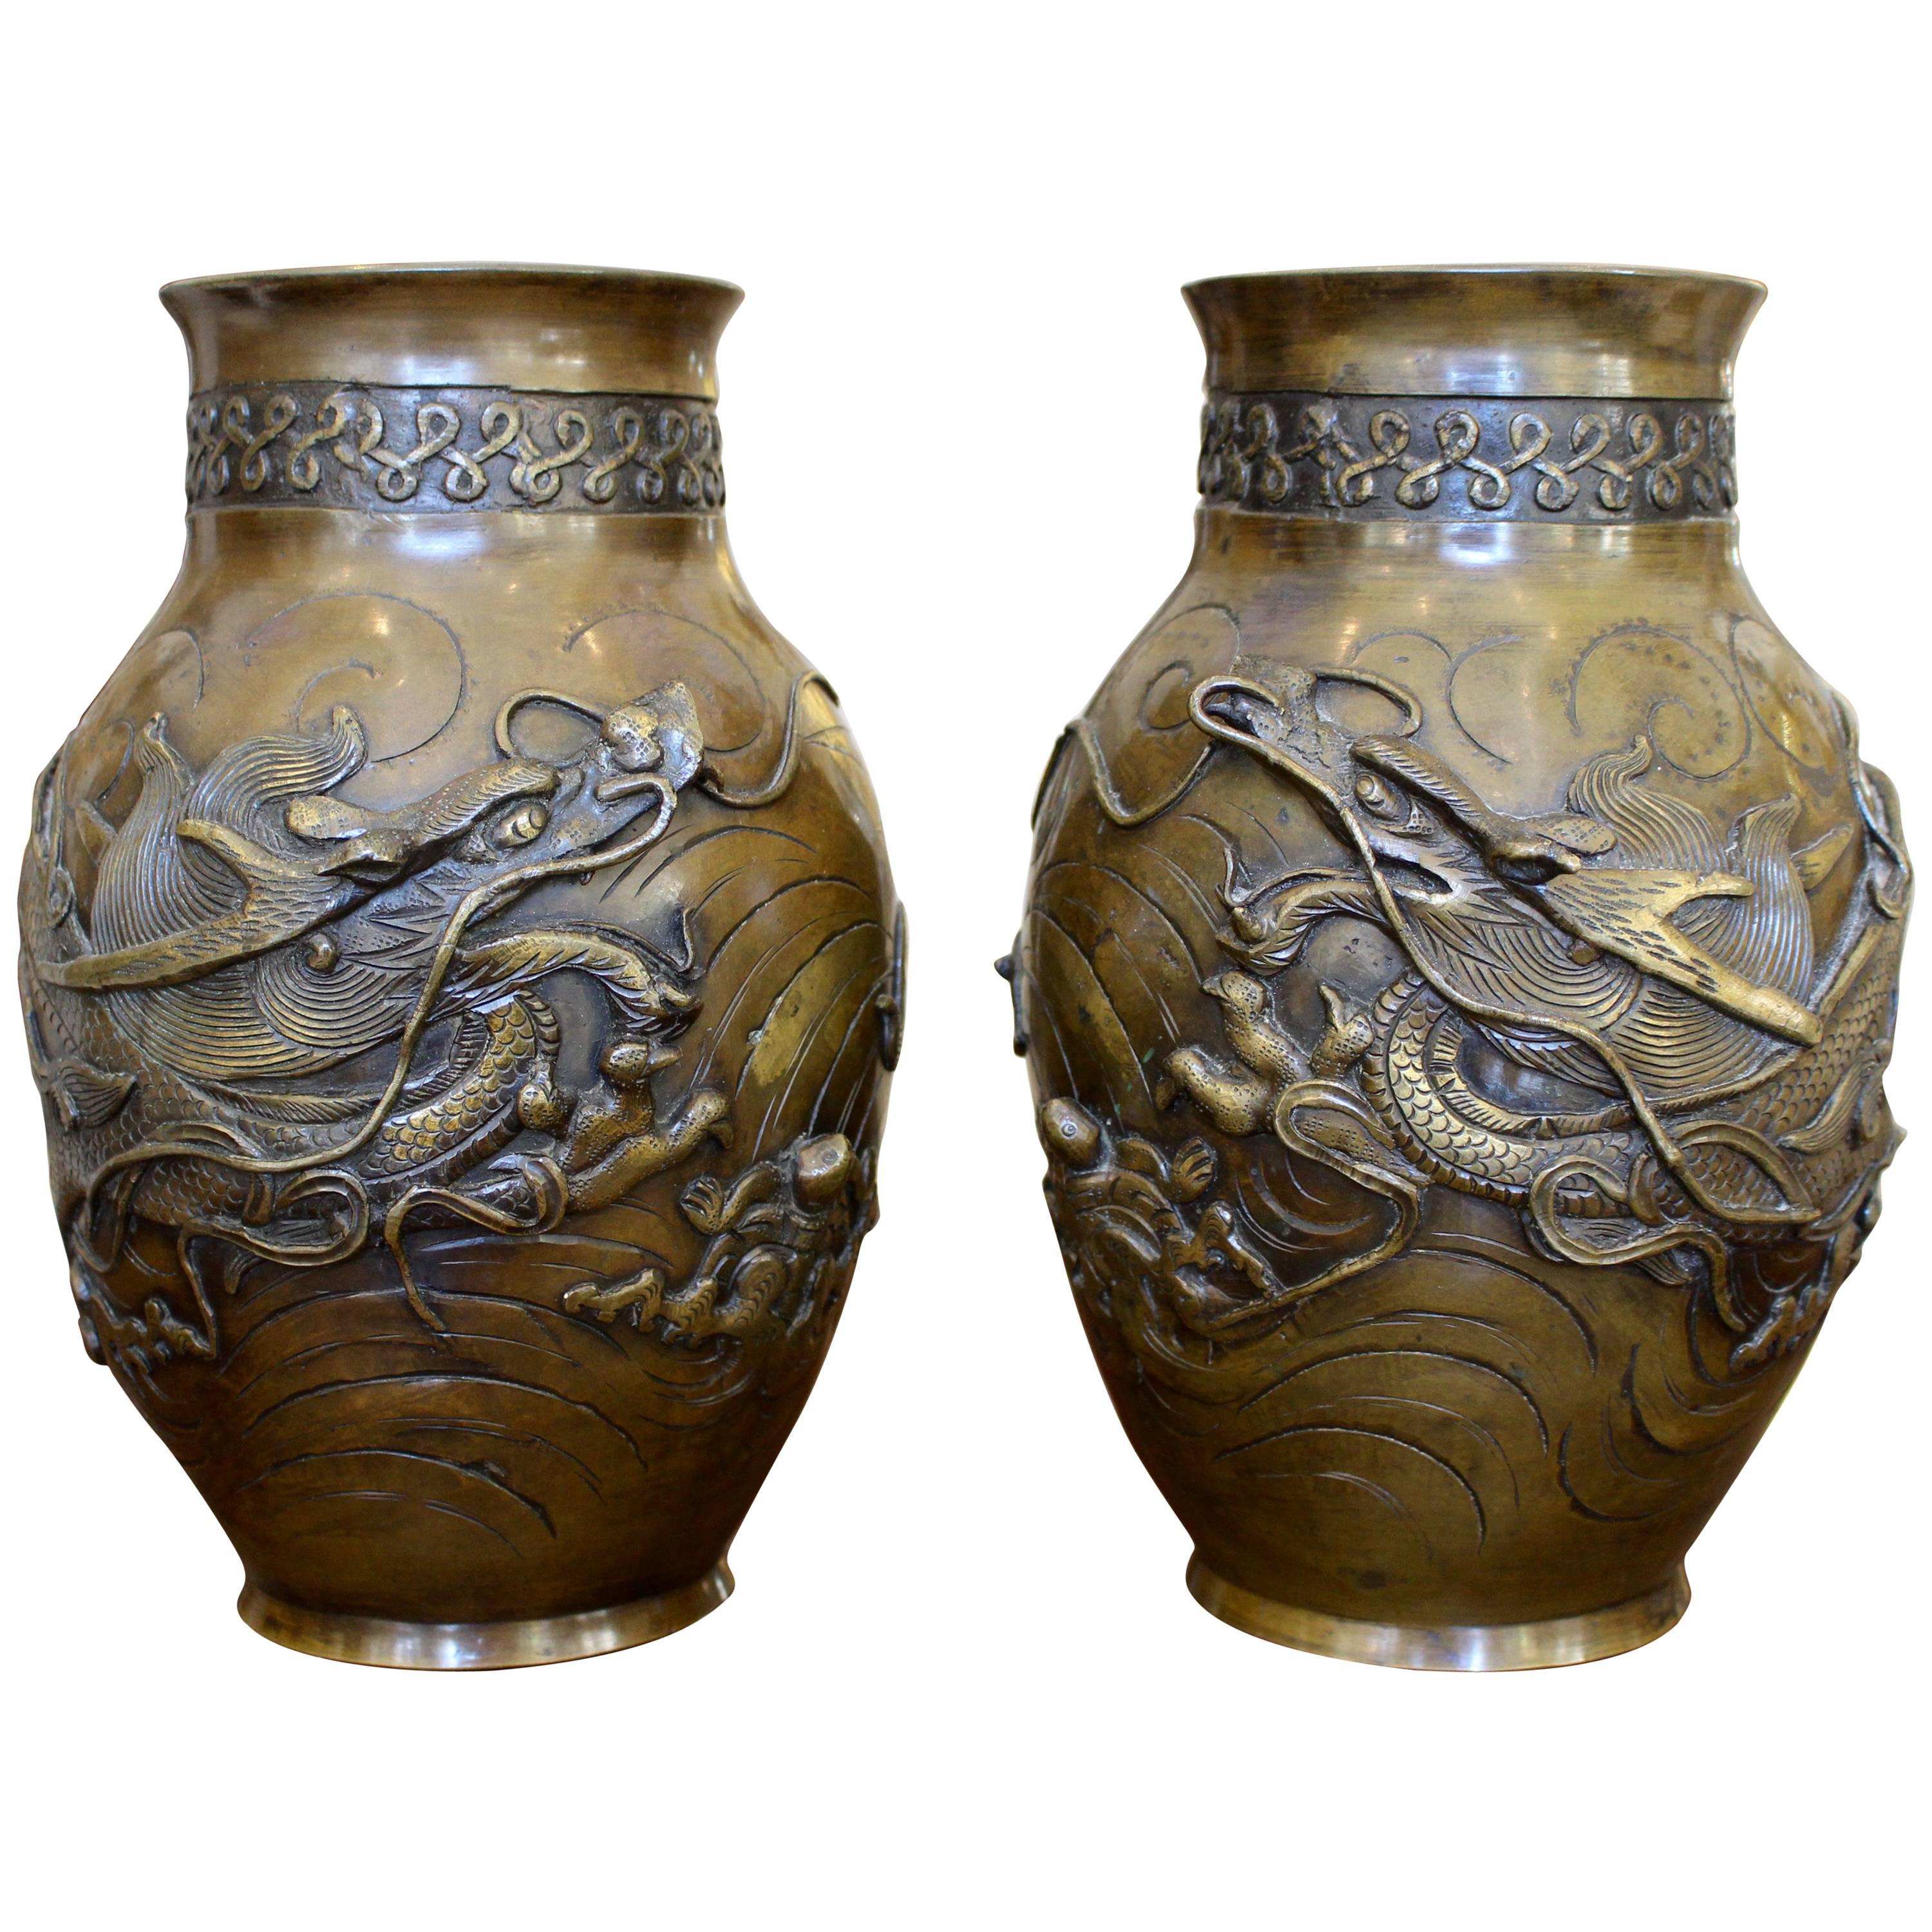 Pair of Japanese Bronze Vases Finely Cast with High Relief Dragon Figures